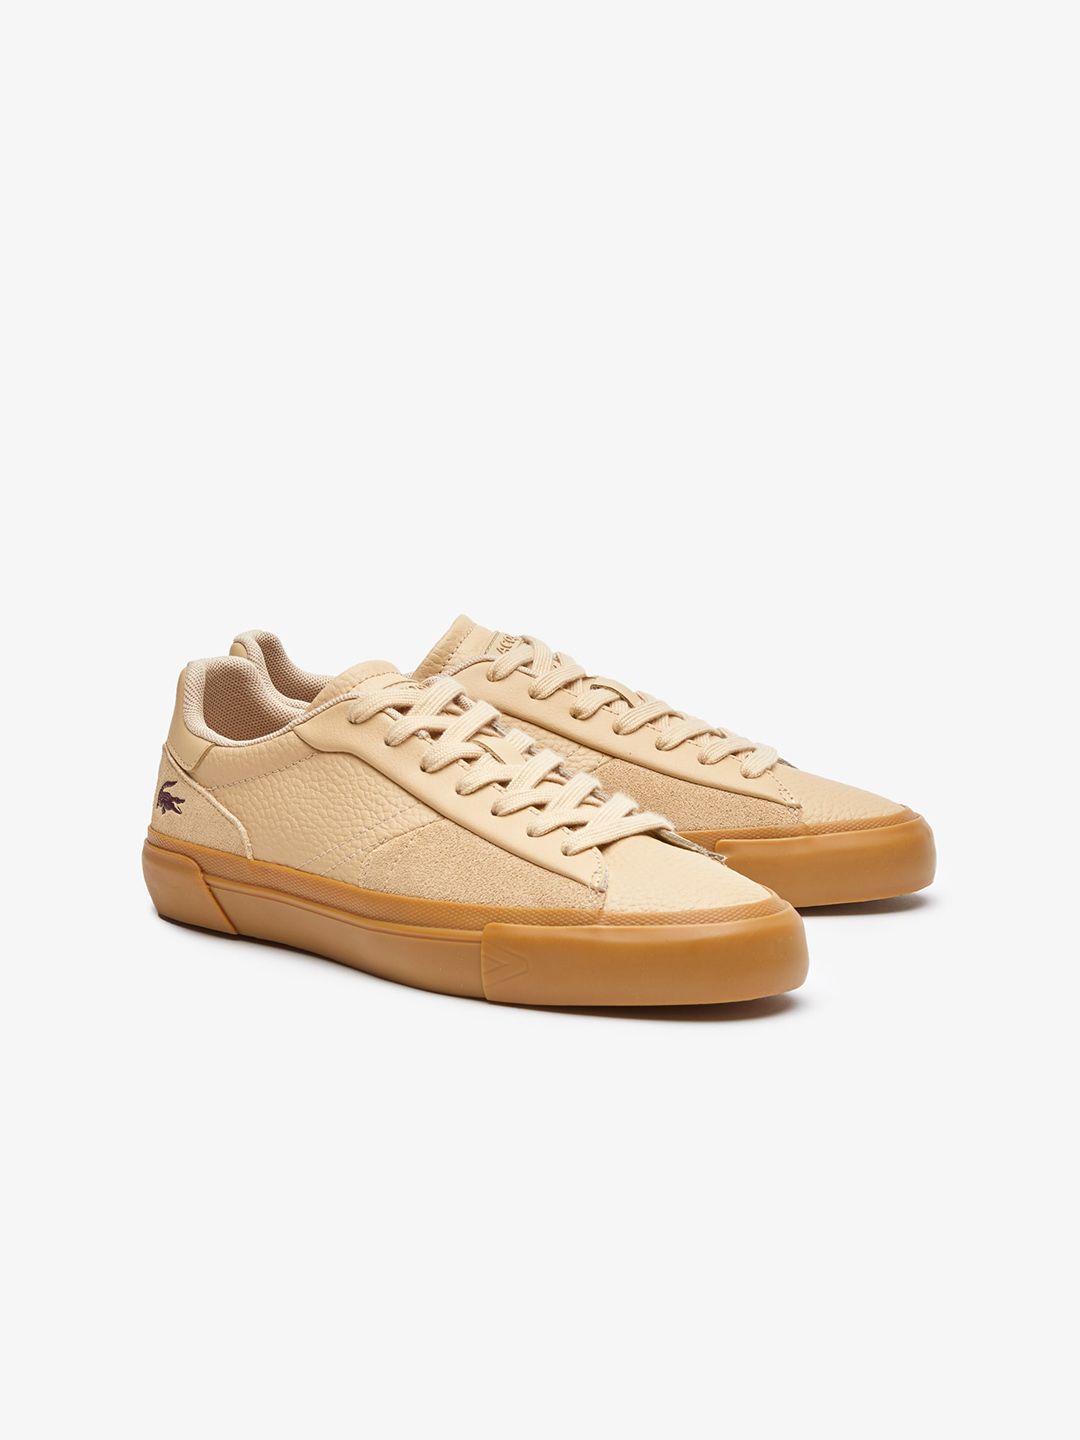 Lacoste Women L006 Leather Tonal Sneakers Price in India